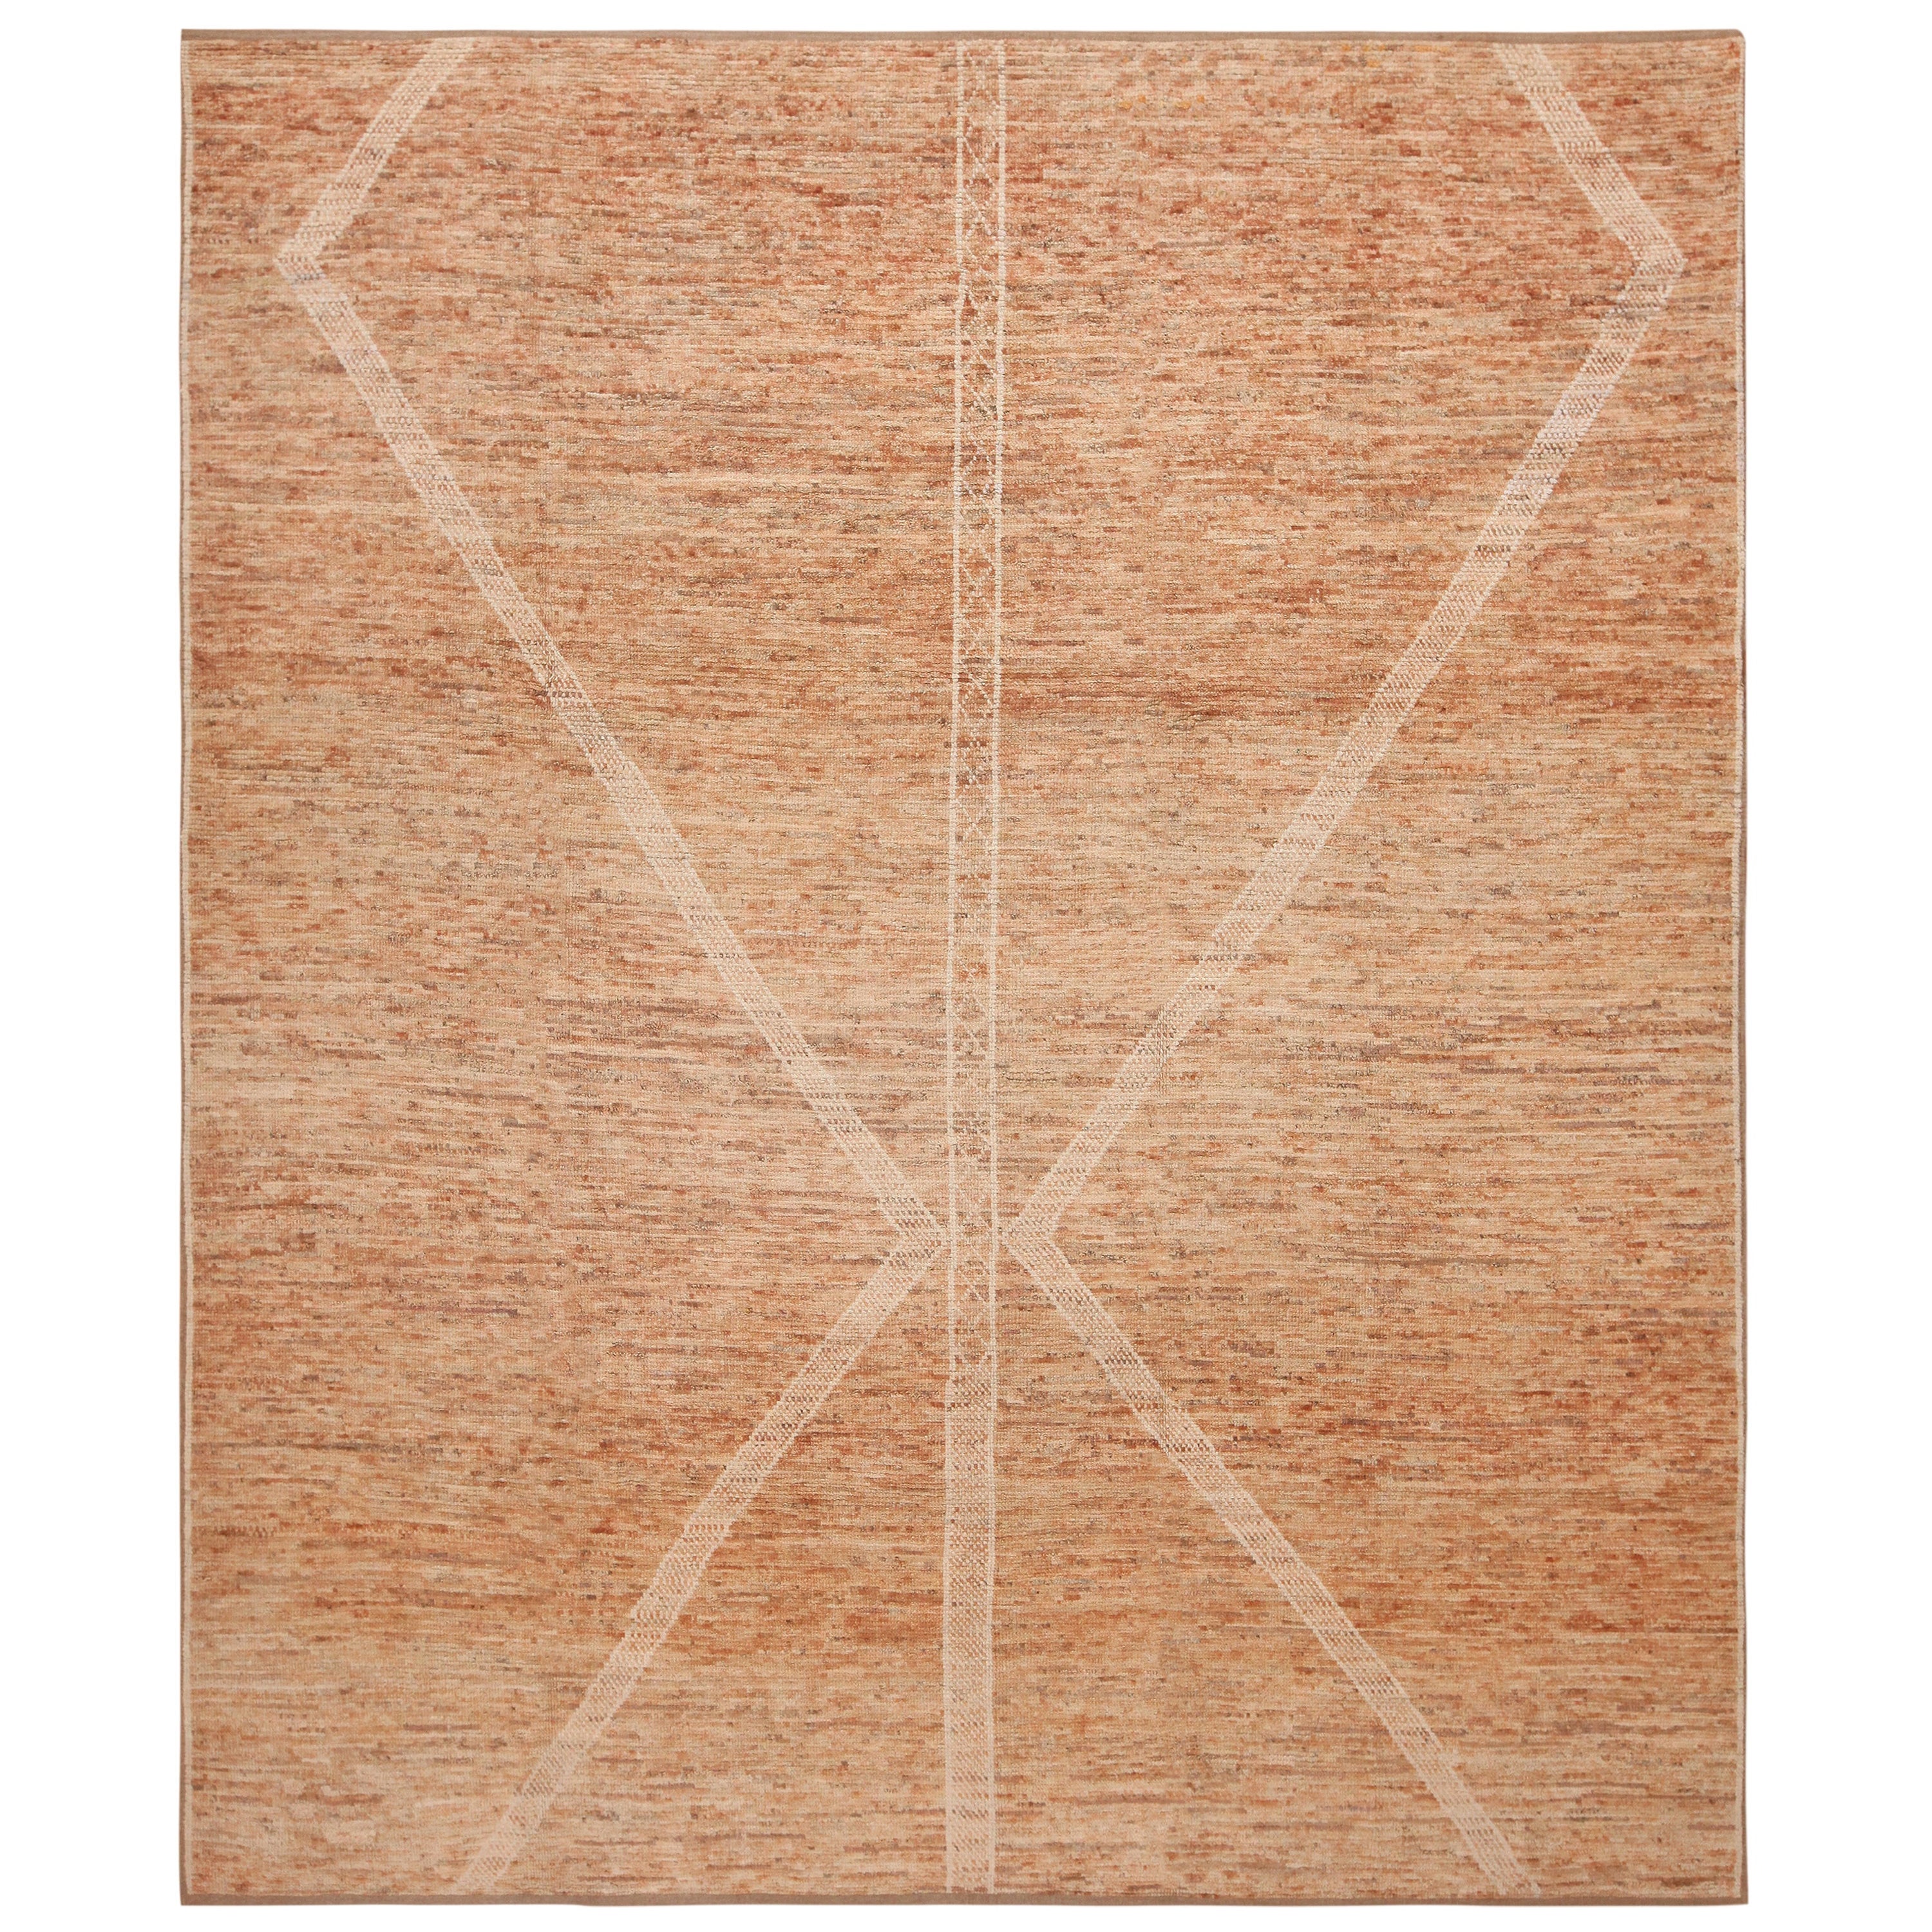 Nazmiyal Collection Minimalist Design odern Area Rug. 8 ft 4 in x 9 ft 7 in